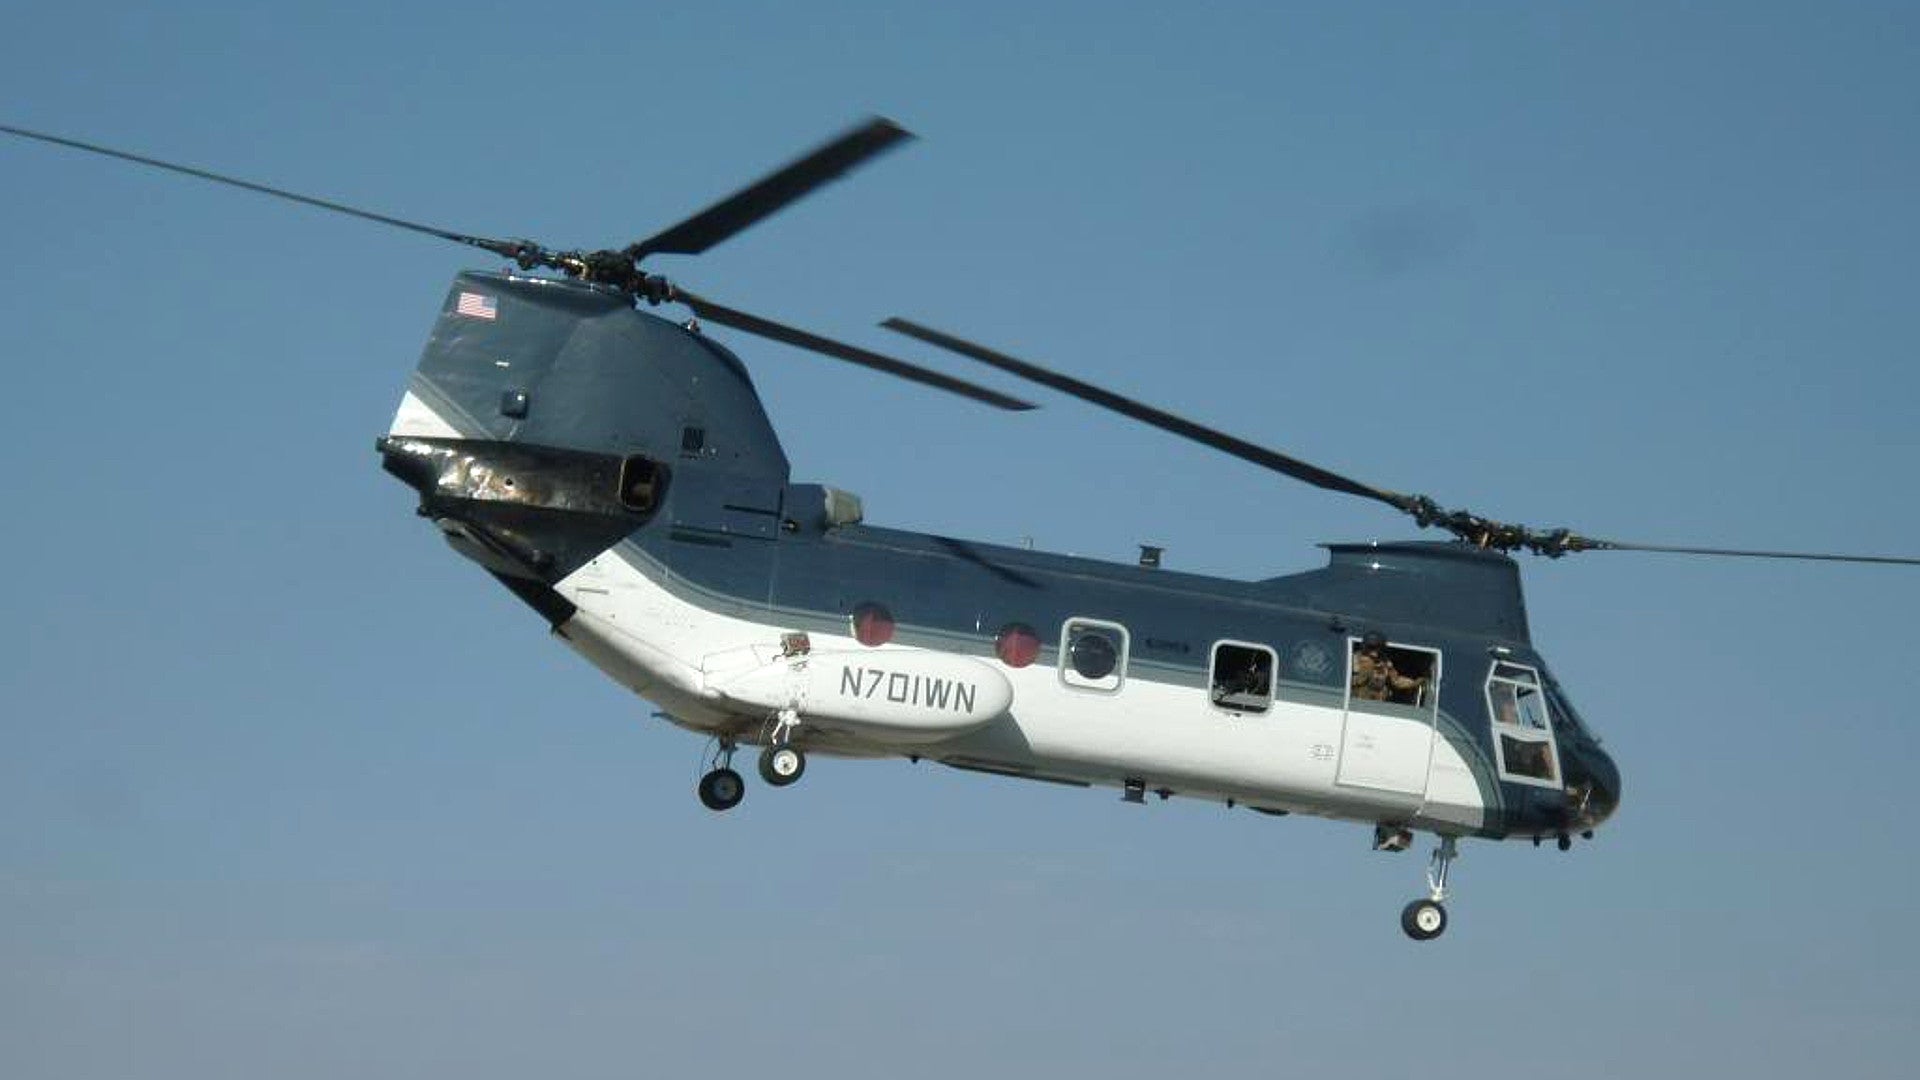 U.S. Secretary of State Rides in Gun-Toting “Embassy Air” Helicopter In Afghanistan